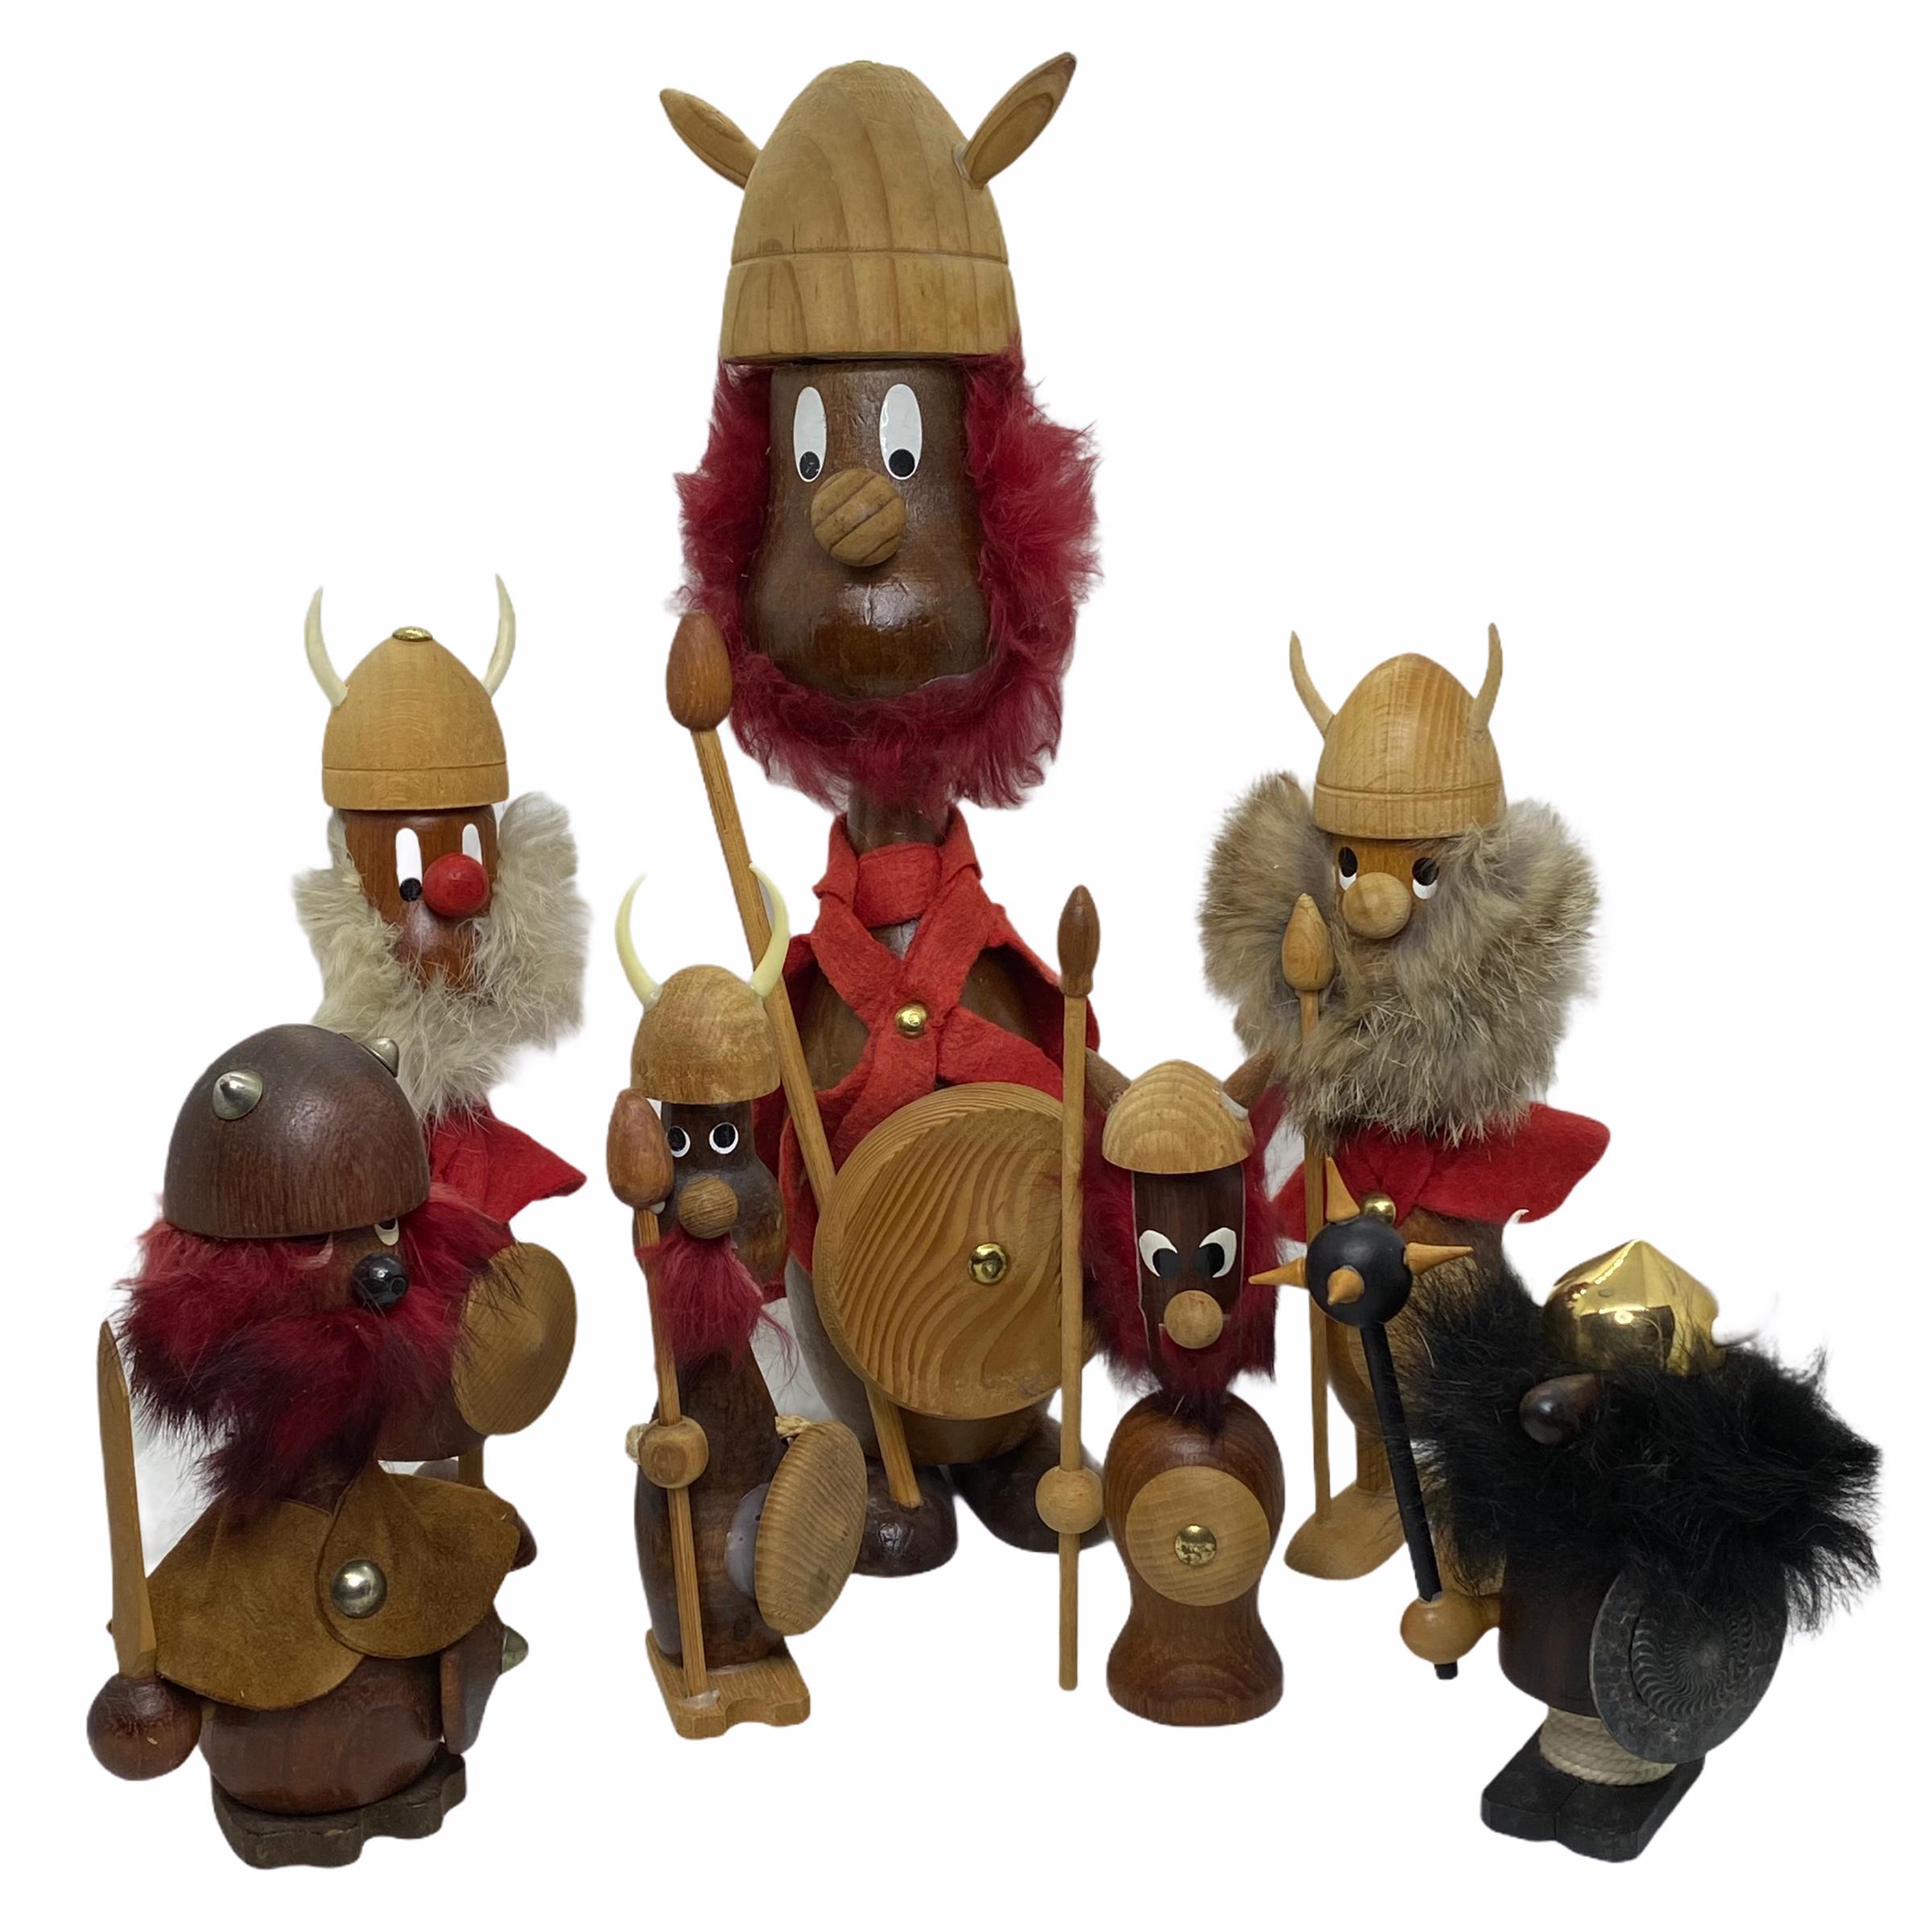 This offer is for a collection of seven Danish vikings by Hans Bolling and Bojesen. The Vikings are made out of mix woods and real fur. They are from the 1950s-1970s. Dimensions very the tallest one 13.5” high and the smallest one is 4.5” high. Nice